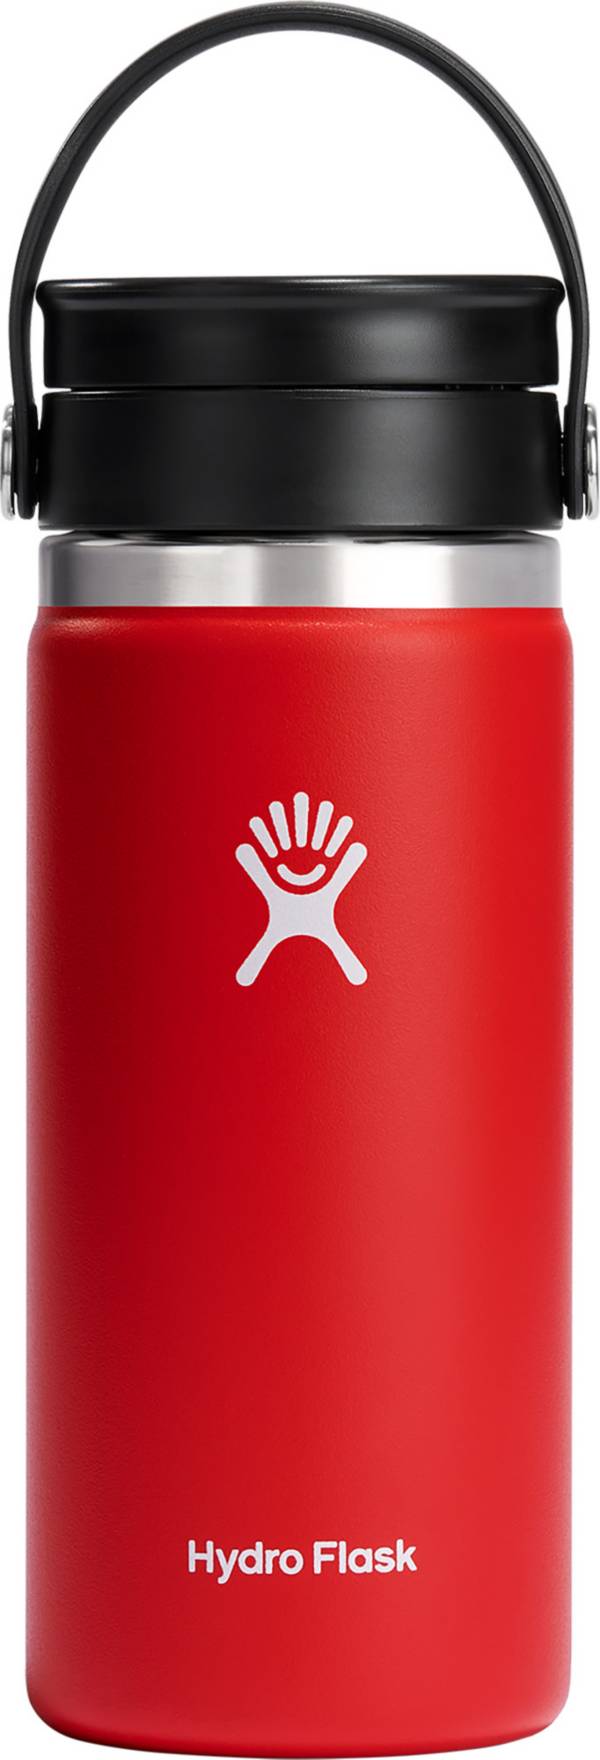 Hydro Flask W16BCX110 16oz Coffee Bottle with Flex Sip - White for